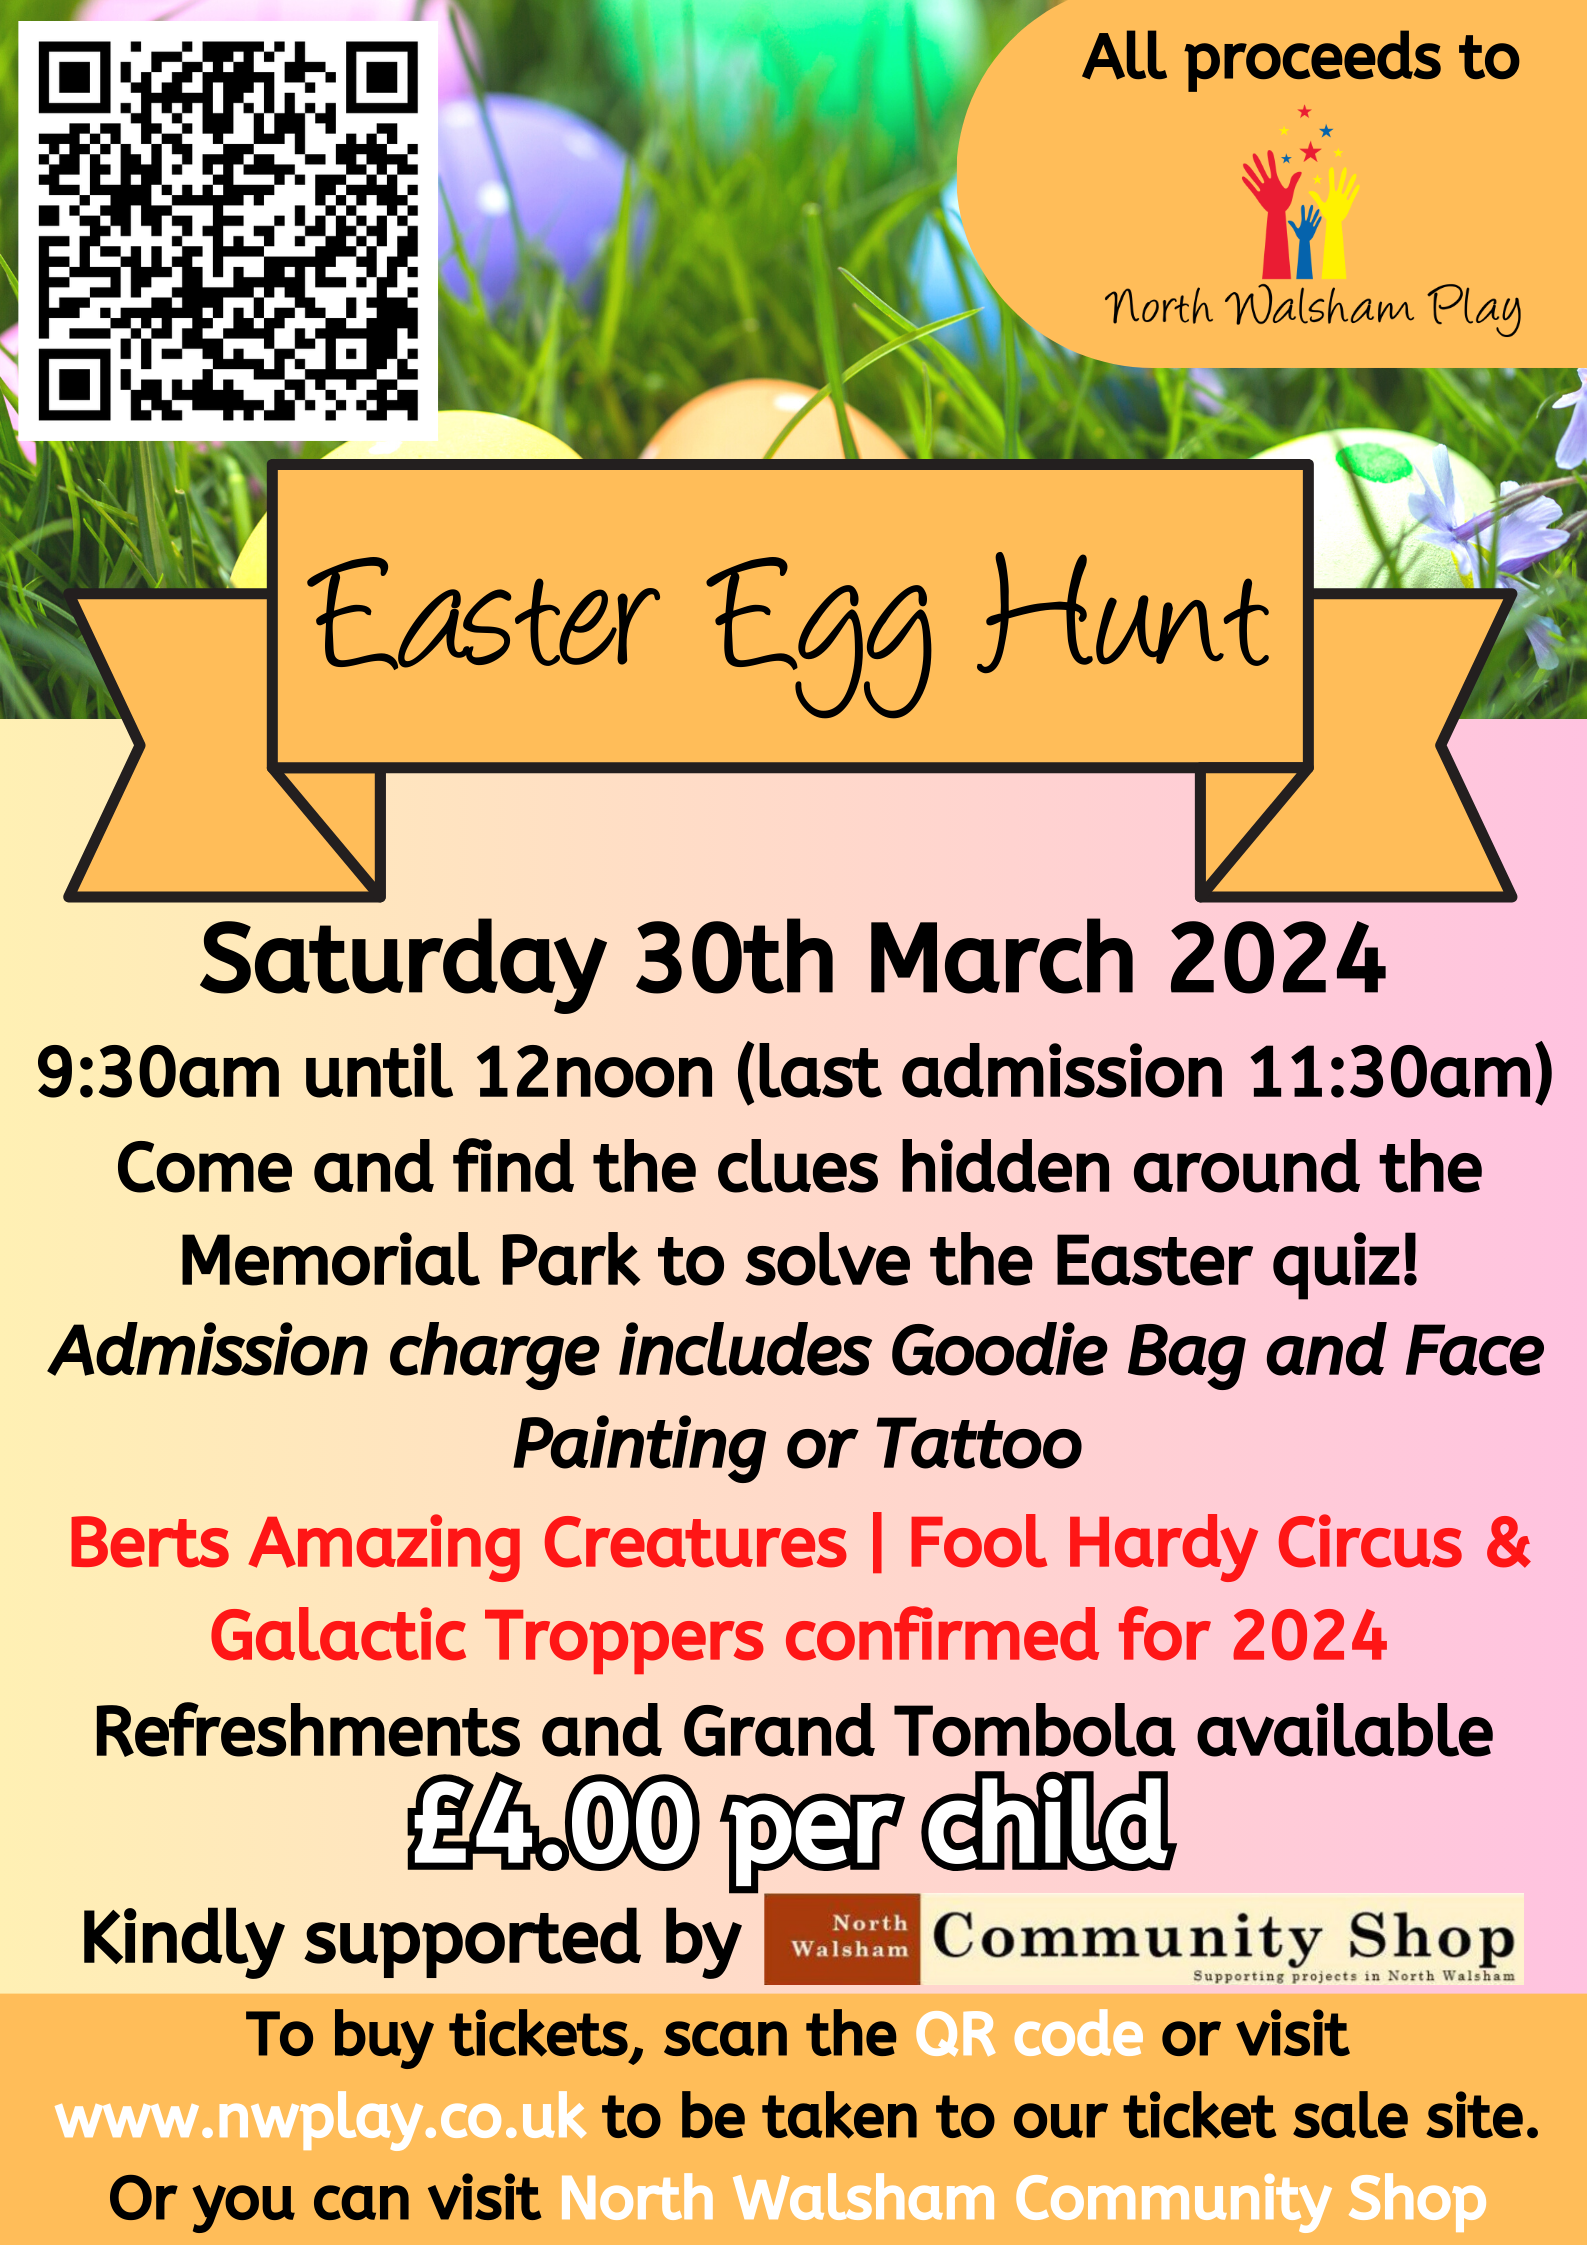 Easter Egg Hunt 2024 – Tickets on sale now!